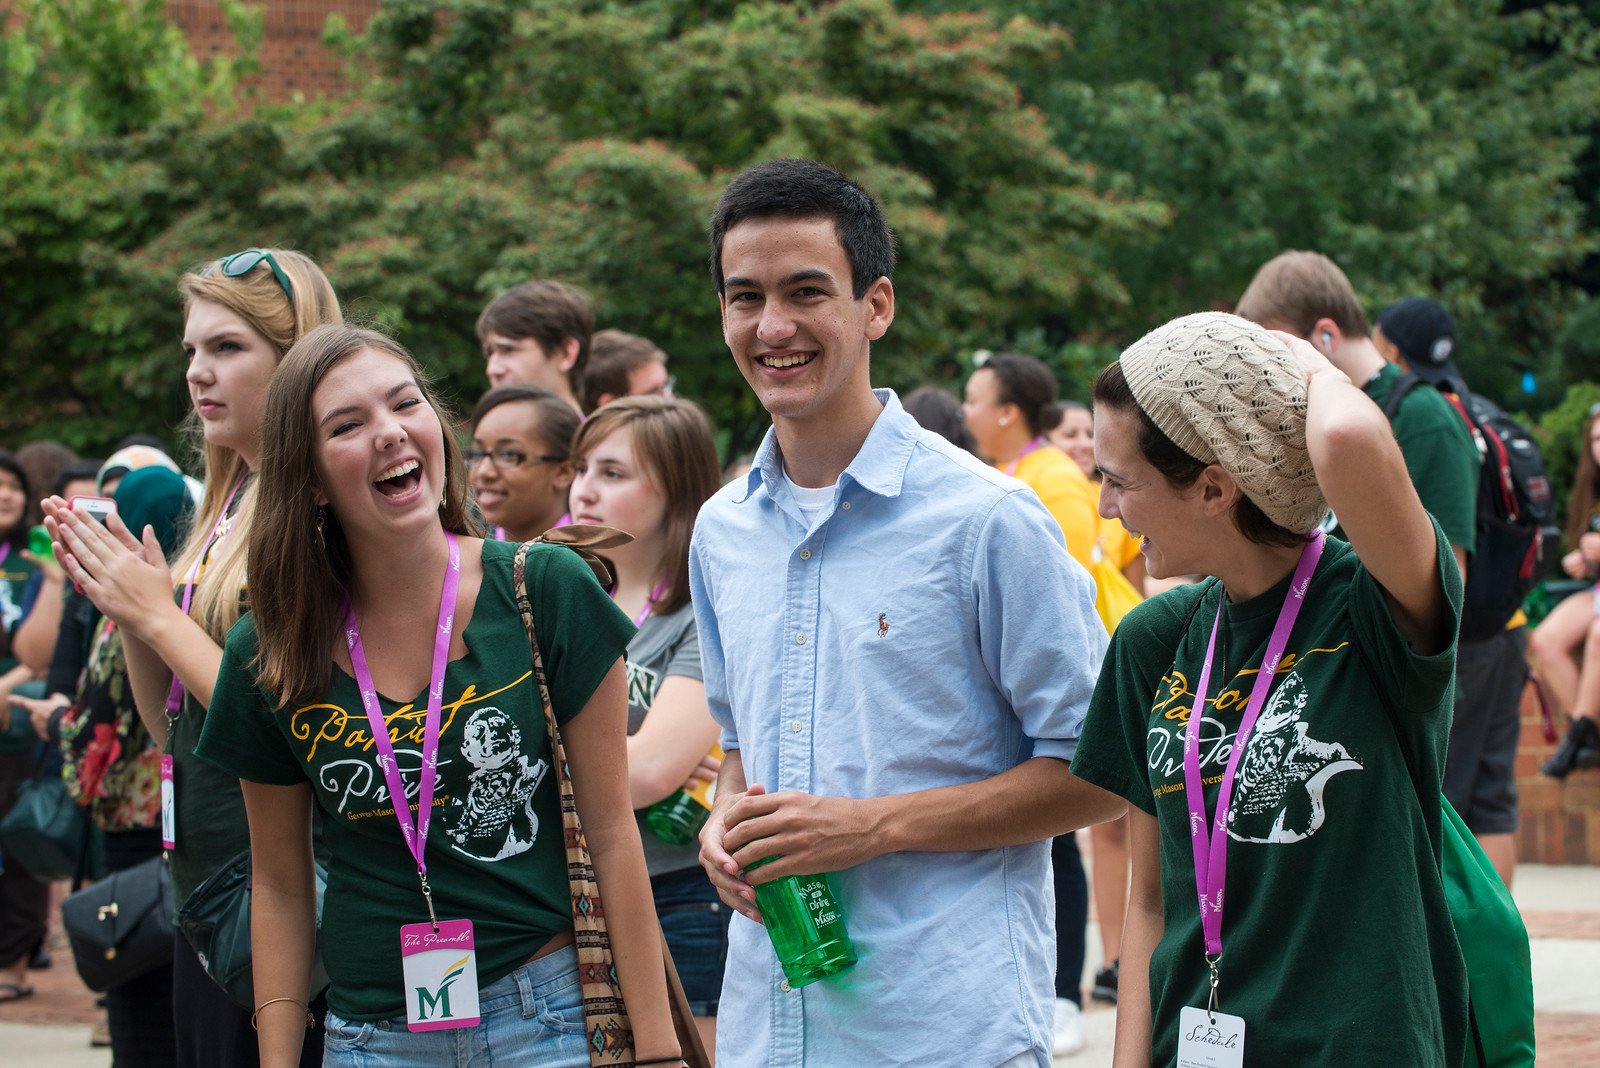 "New students meet and greet during preamble activities following the New Student Convocation. Photo by Evan Cantwell/Creative Services/George Mason University"